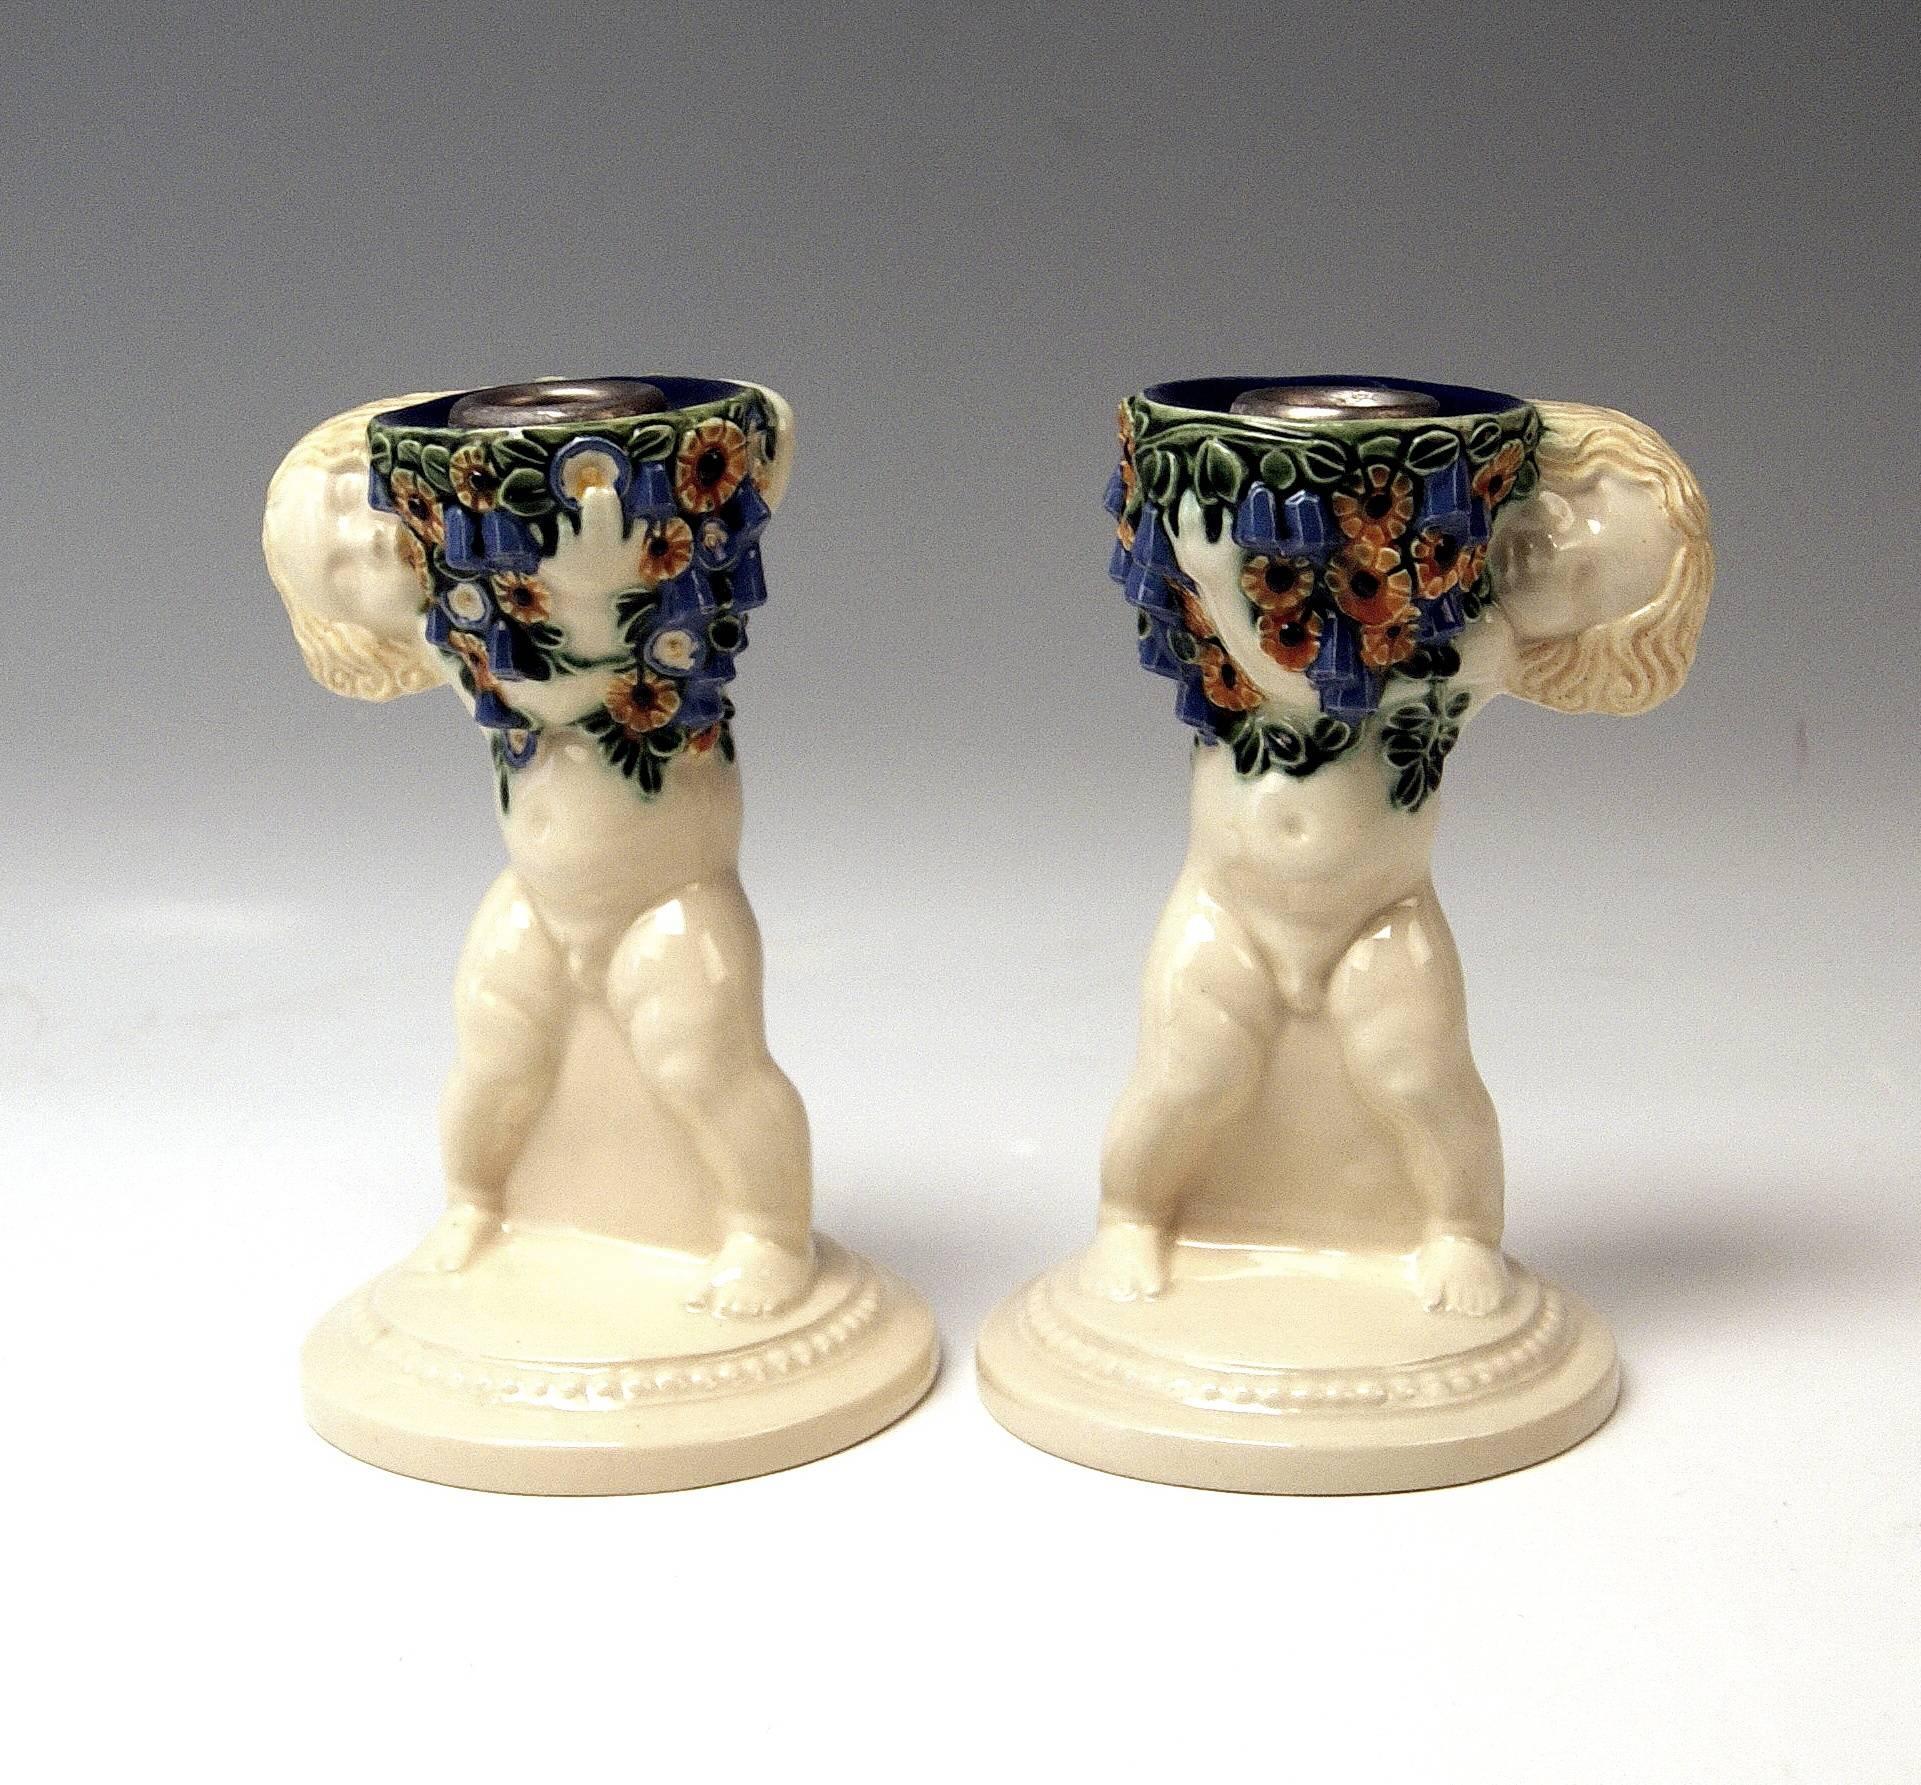 Michael Powolny Art Nouveau pair of candlesticks with cherubs, most lovely ceramics items!
 Modelled by Michael Powolny (1871-1954), before 1912.

 Hallmarked:
 Manufactured by Wiener Keramik (Vienna Ceramics) (WK / hallmarked).
 Material is